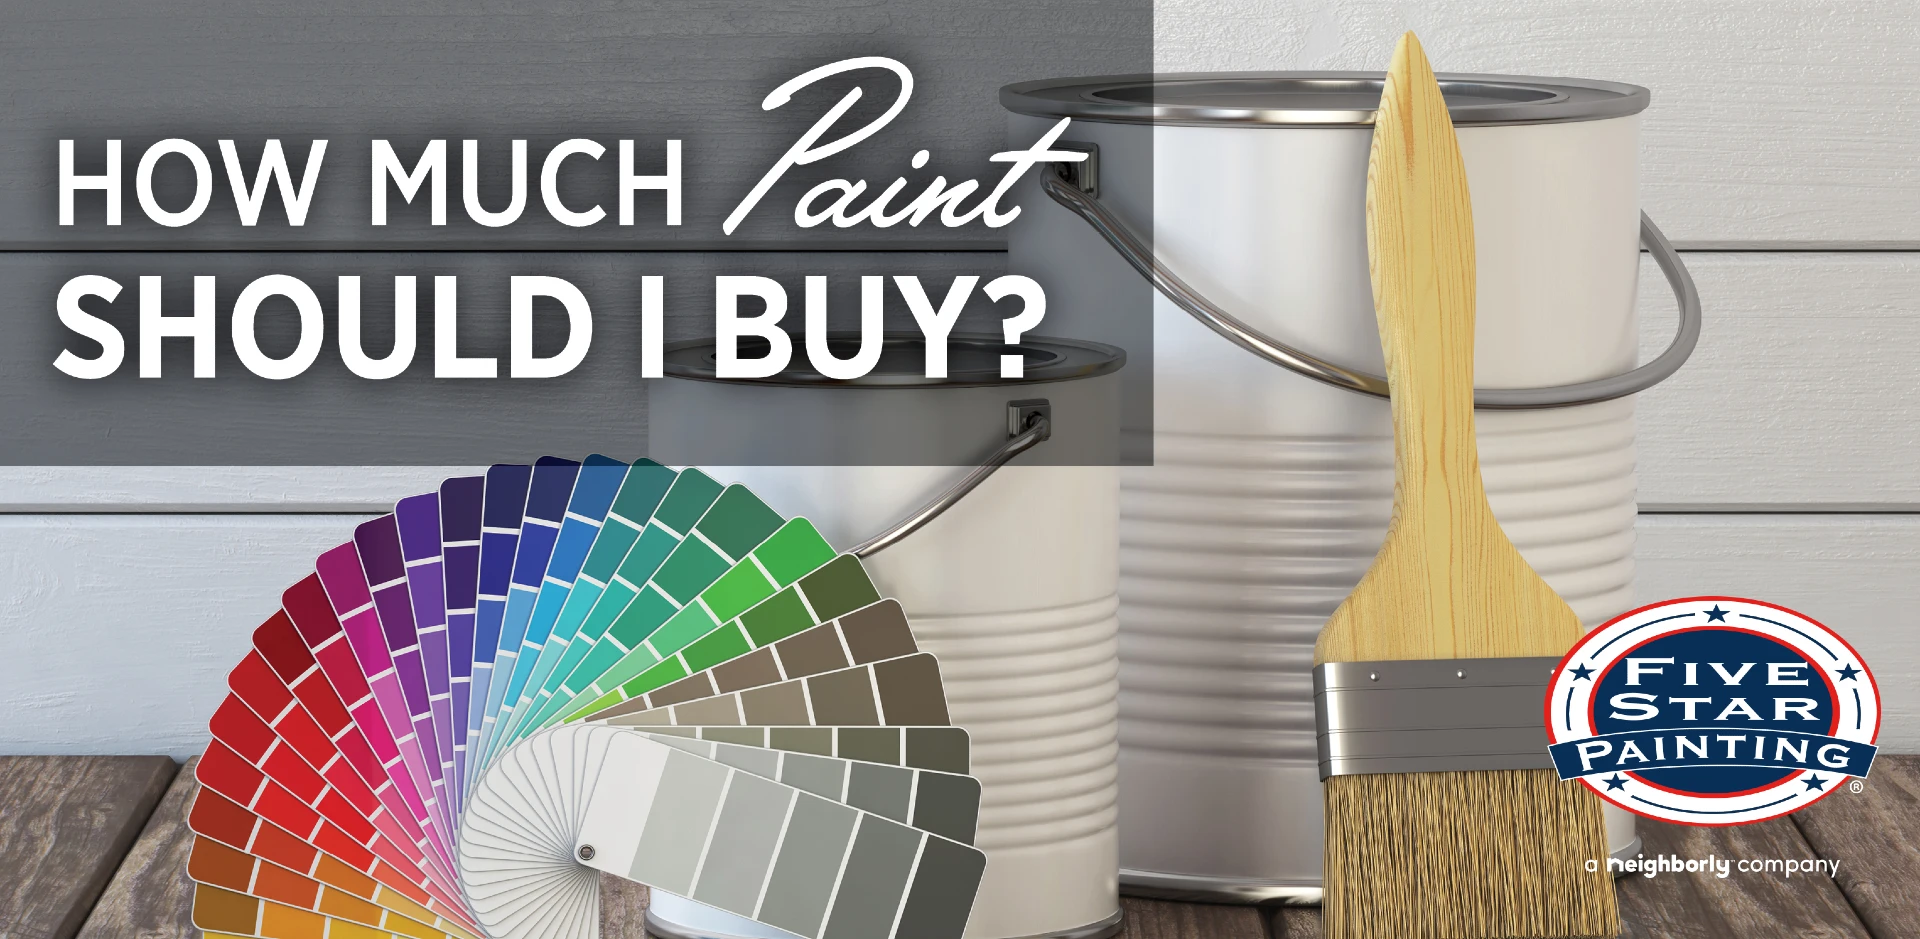 Blog title superimposed over a photo of two white paint cans, a paint brush, and swatches of paint colors